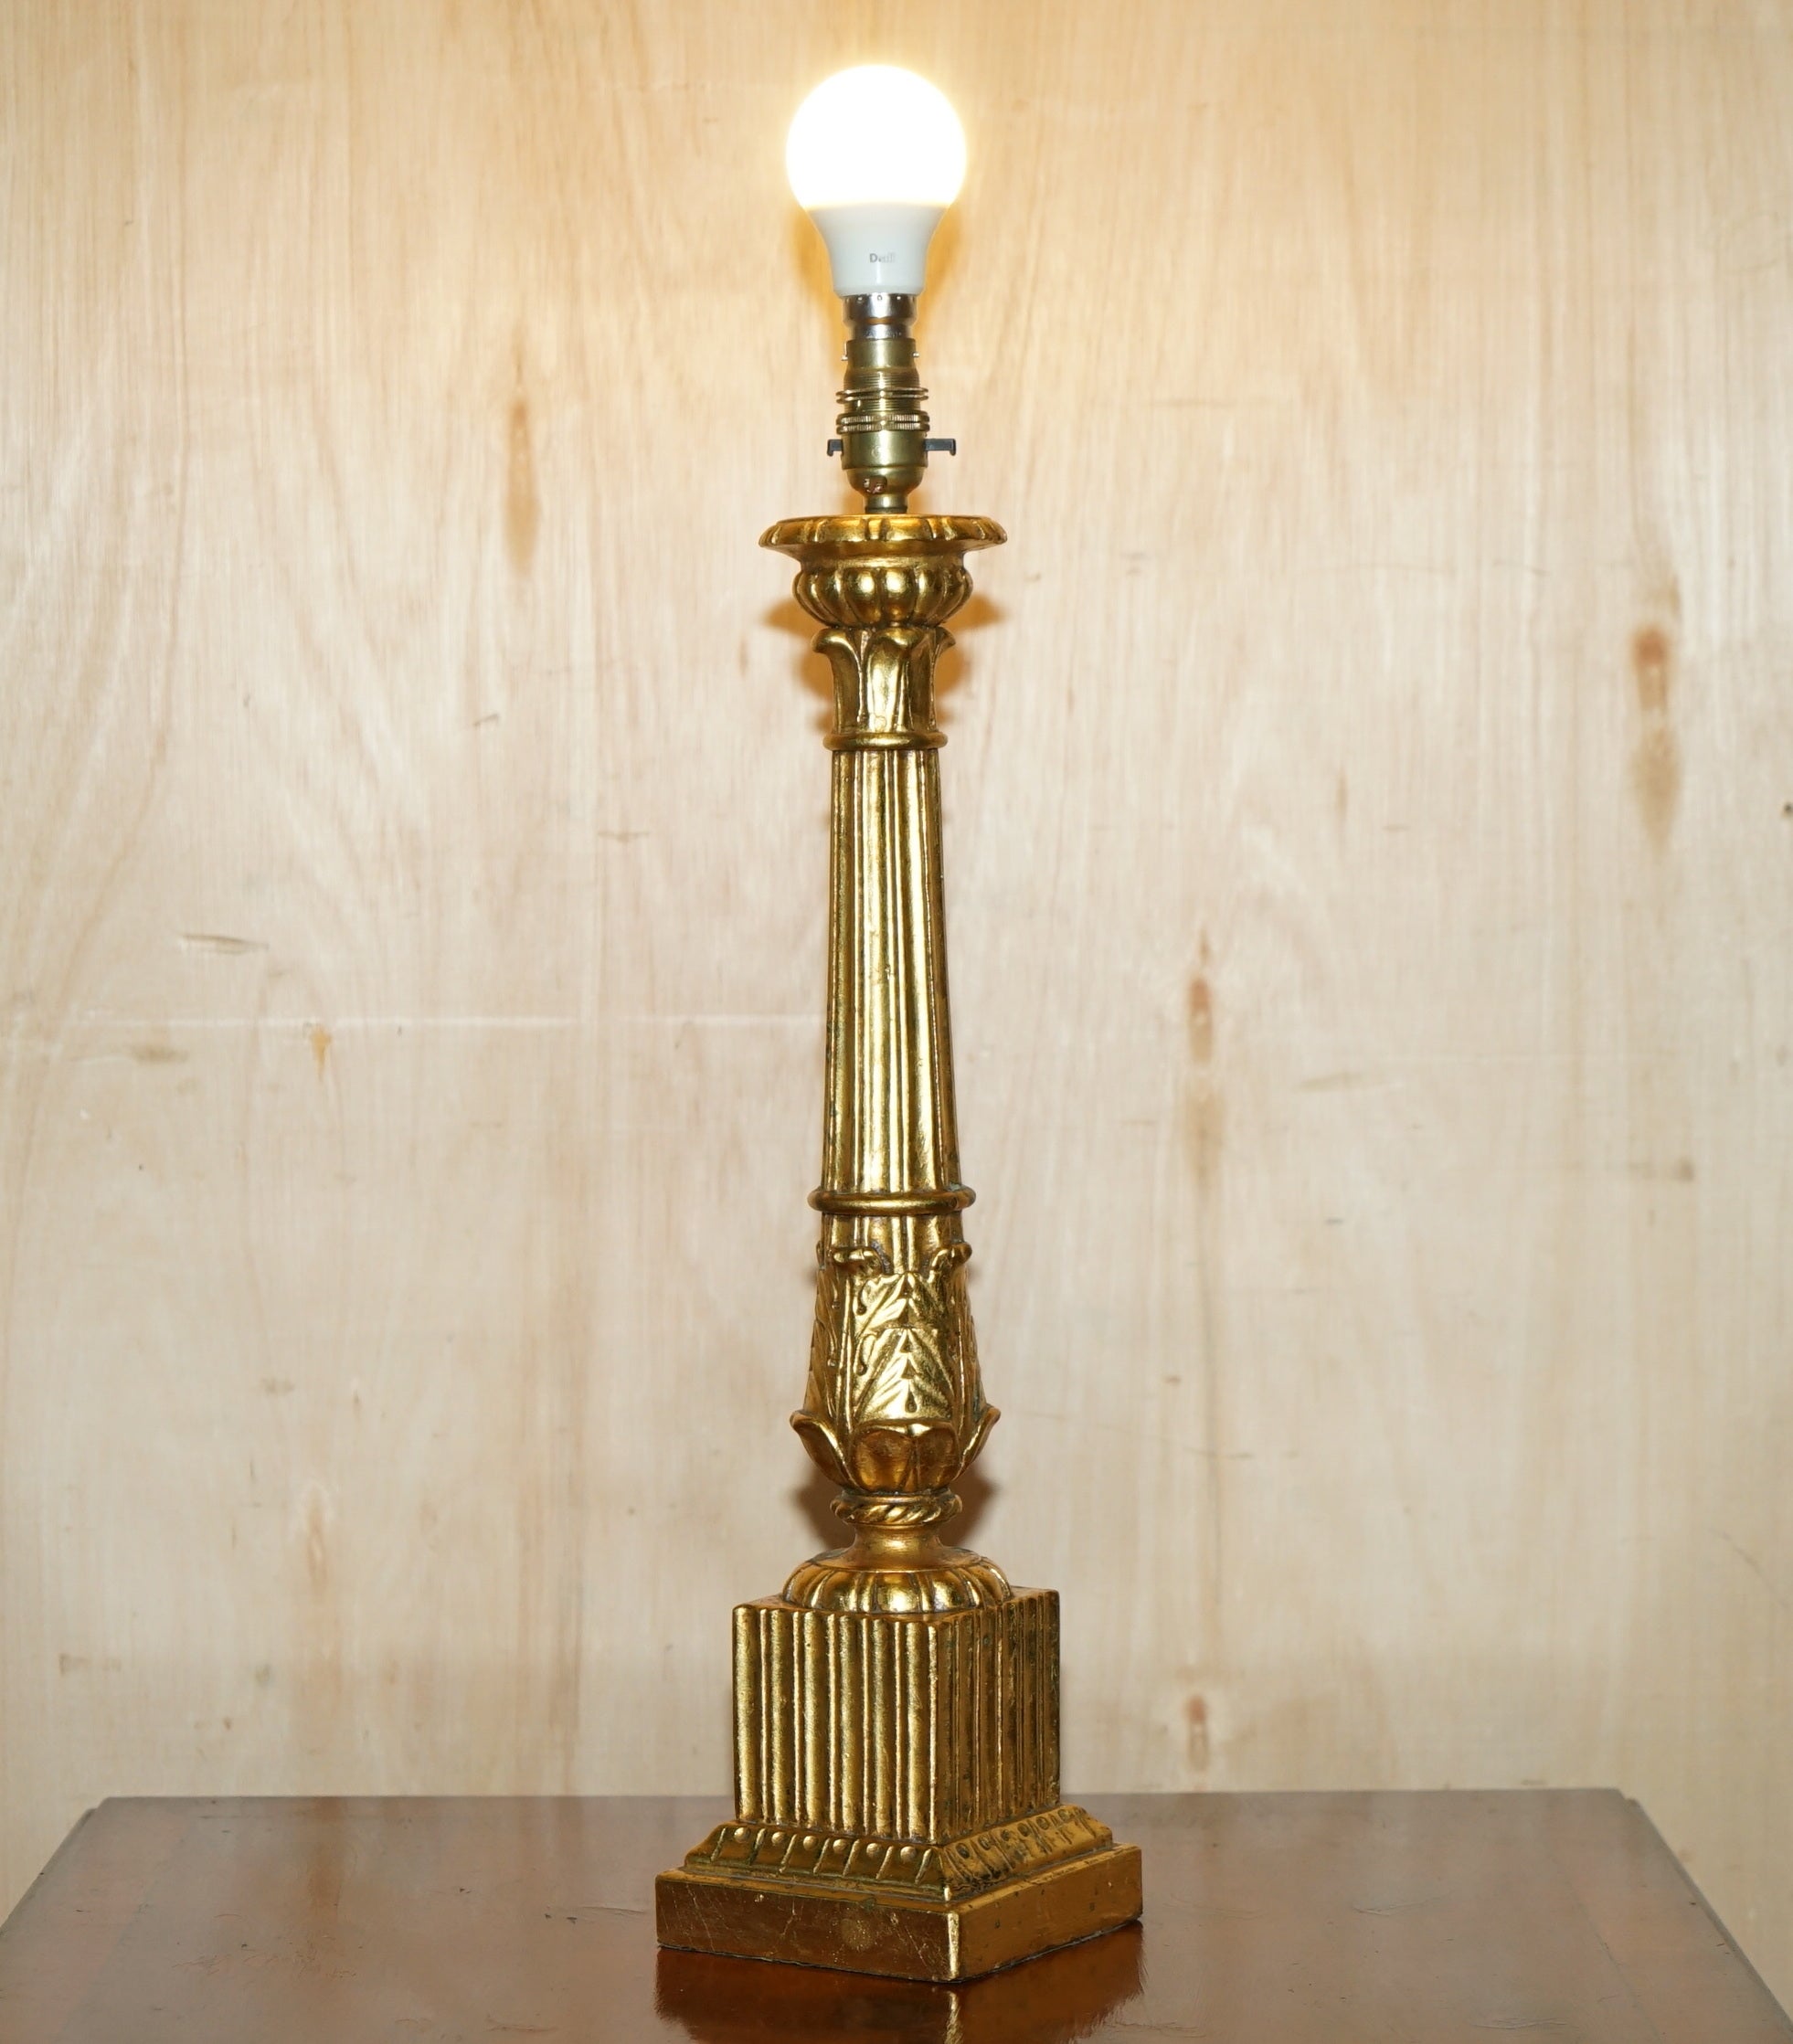 Royal House Antiques

Royal House Antiques is delighted to offer for sale this absolutely stunning circa 1960 hand carved and gilded table lamp in the form of a Corinthian pillar base 

Please note the delivery fee listed is just a guide, it covers